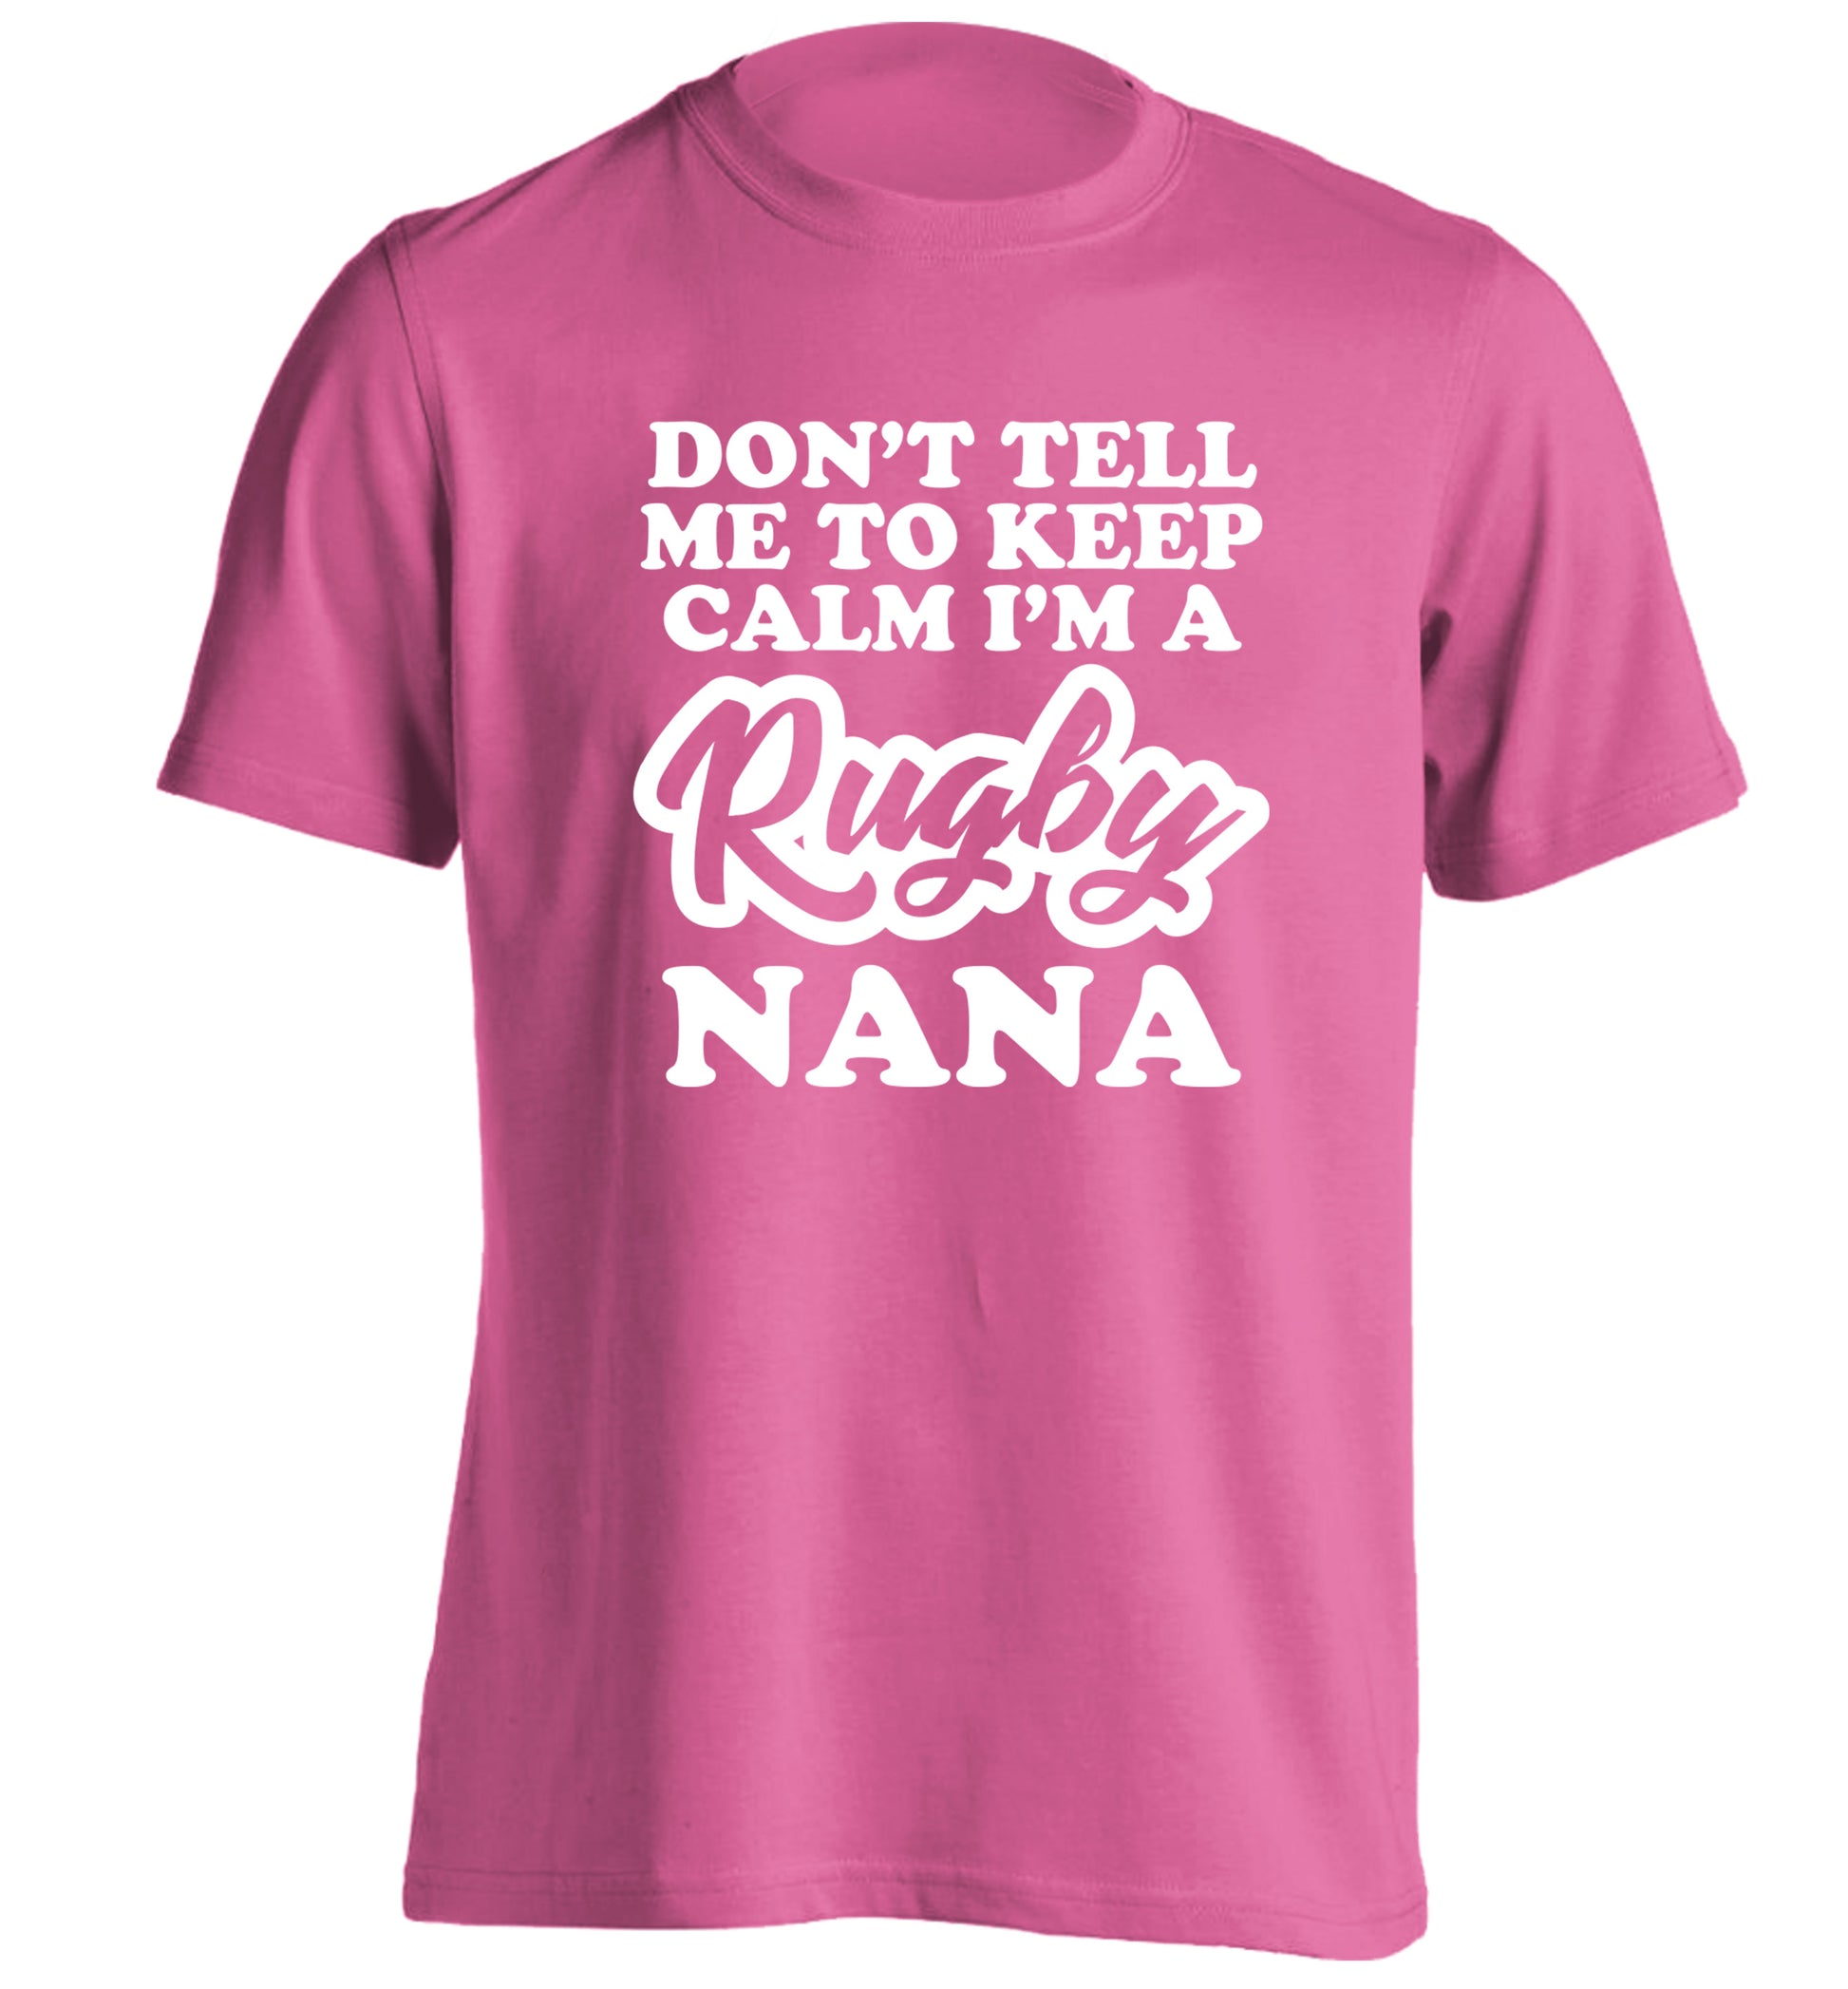 Don't tell me to keep calm I'm a rugby nana adults unisex pink Tshirt 2XL